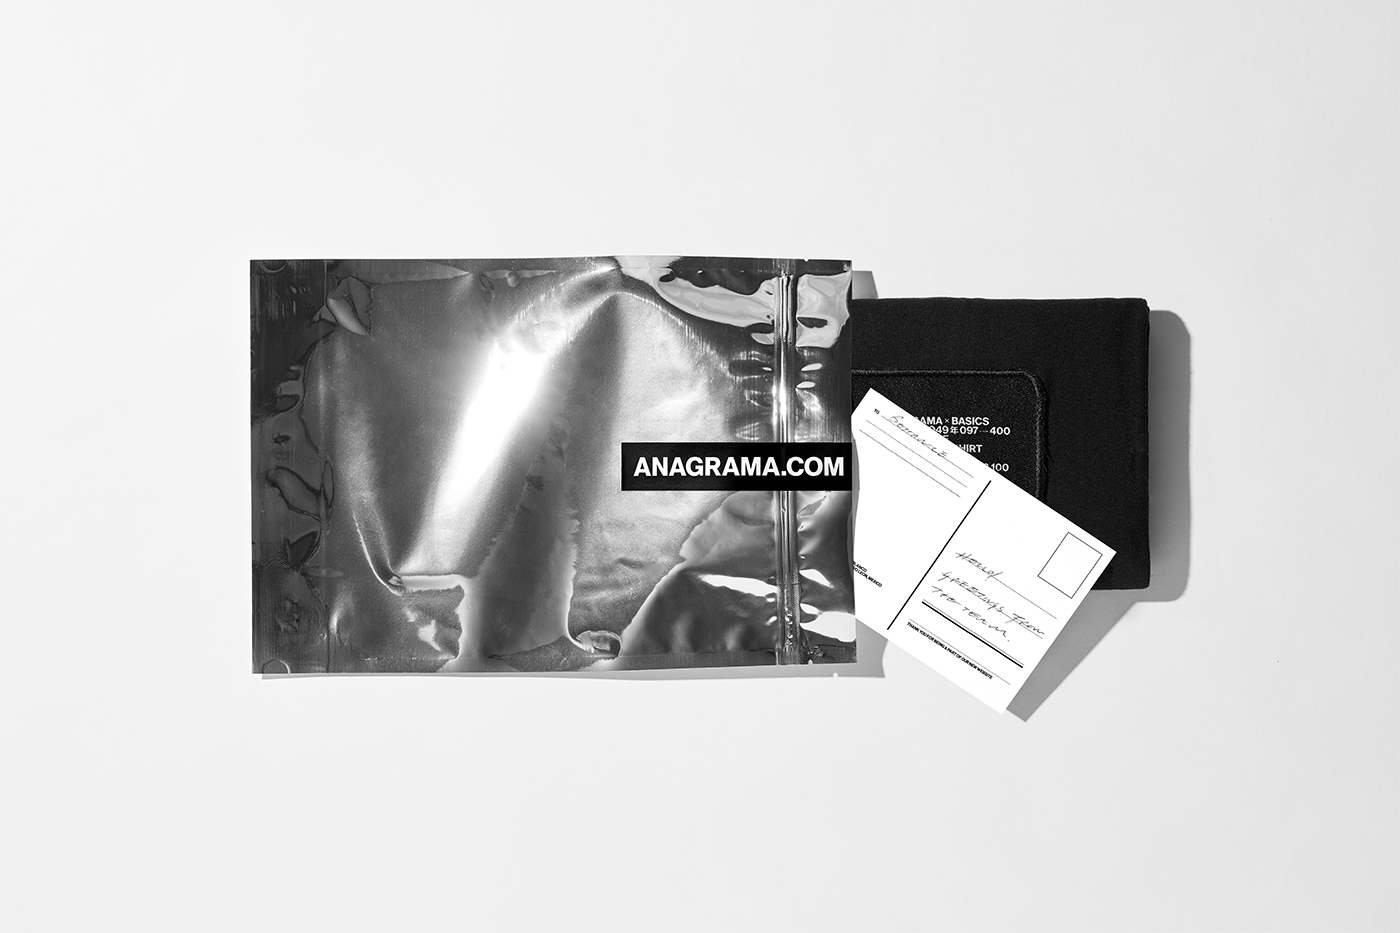 #anagrama #exclusive #black #t-shirt   #embroidery #patch #Design #postcard   #packaging #basics